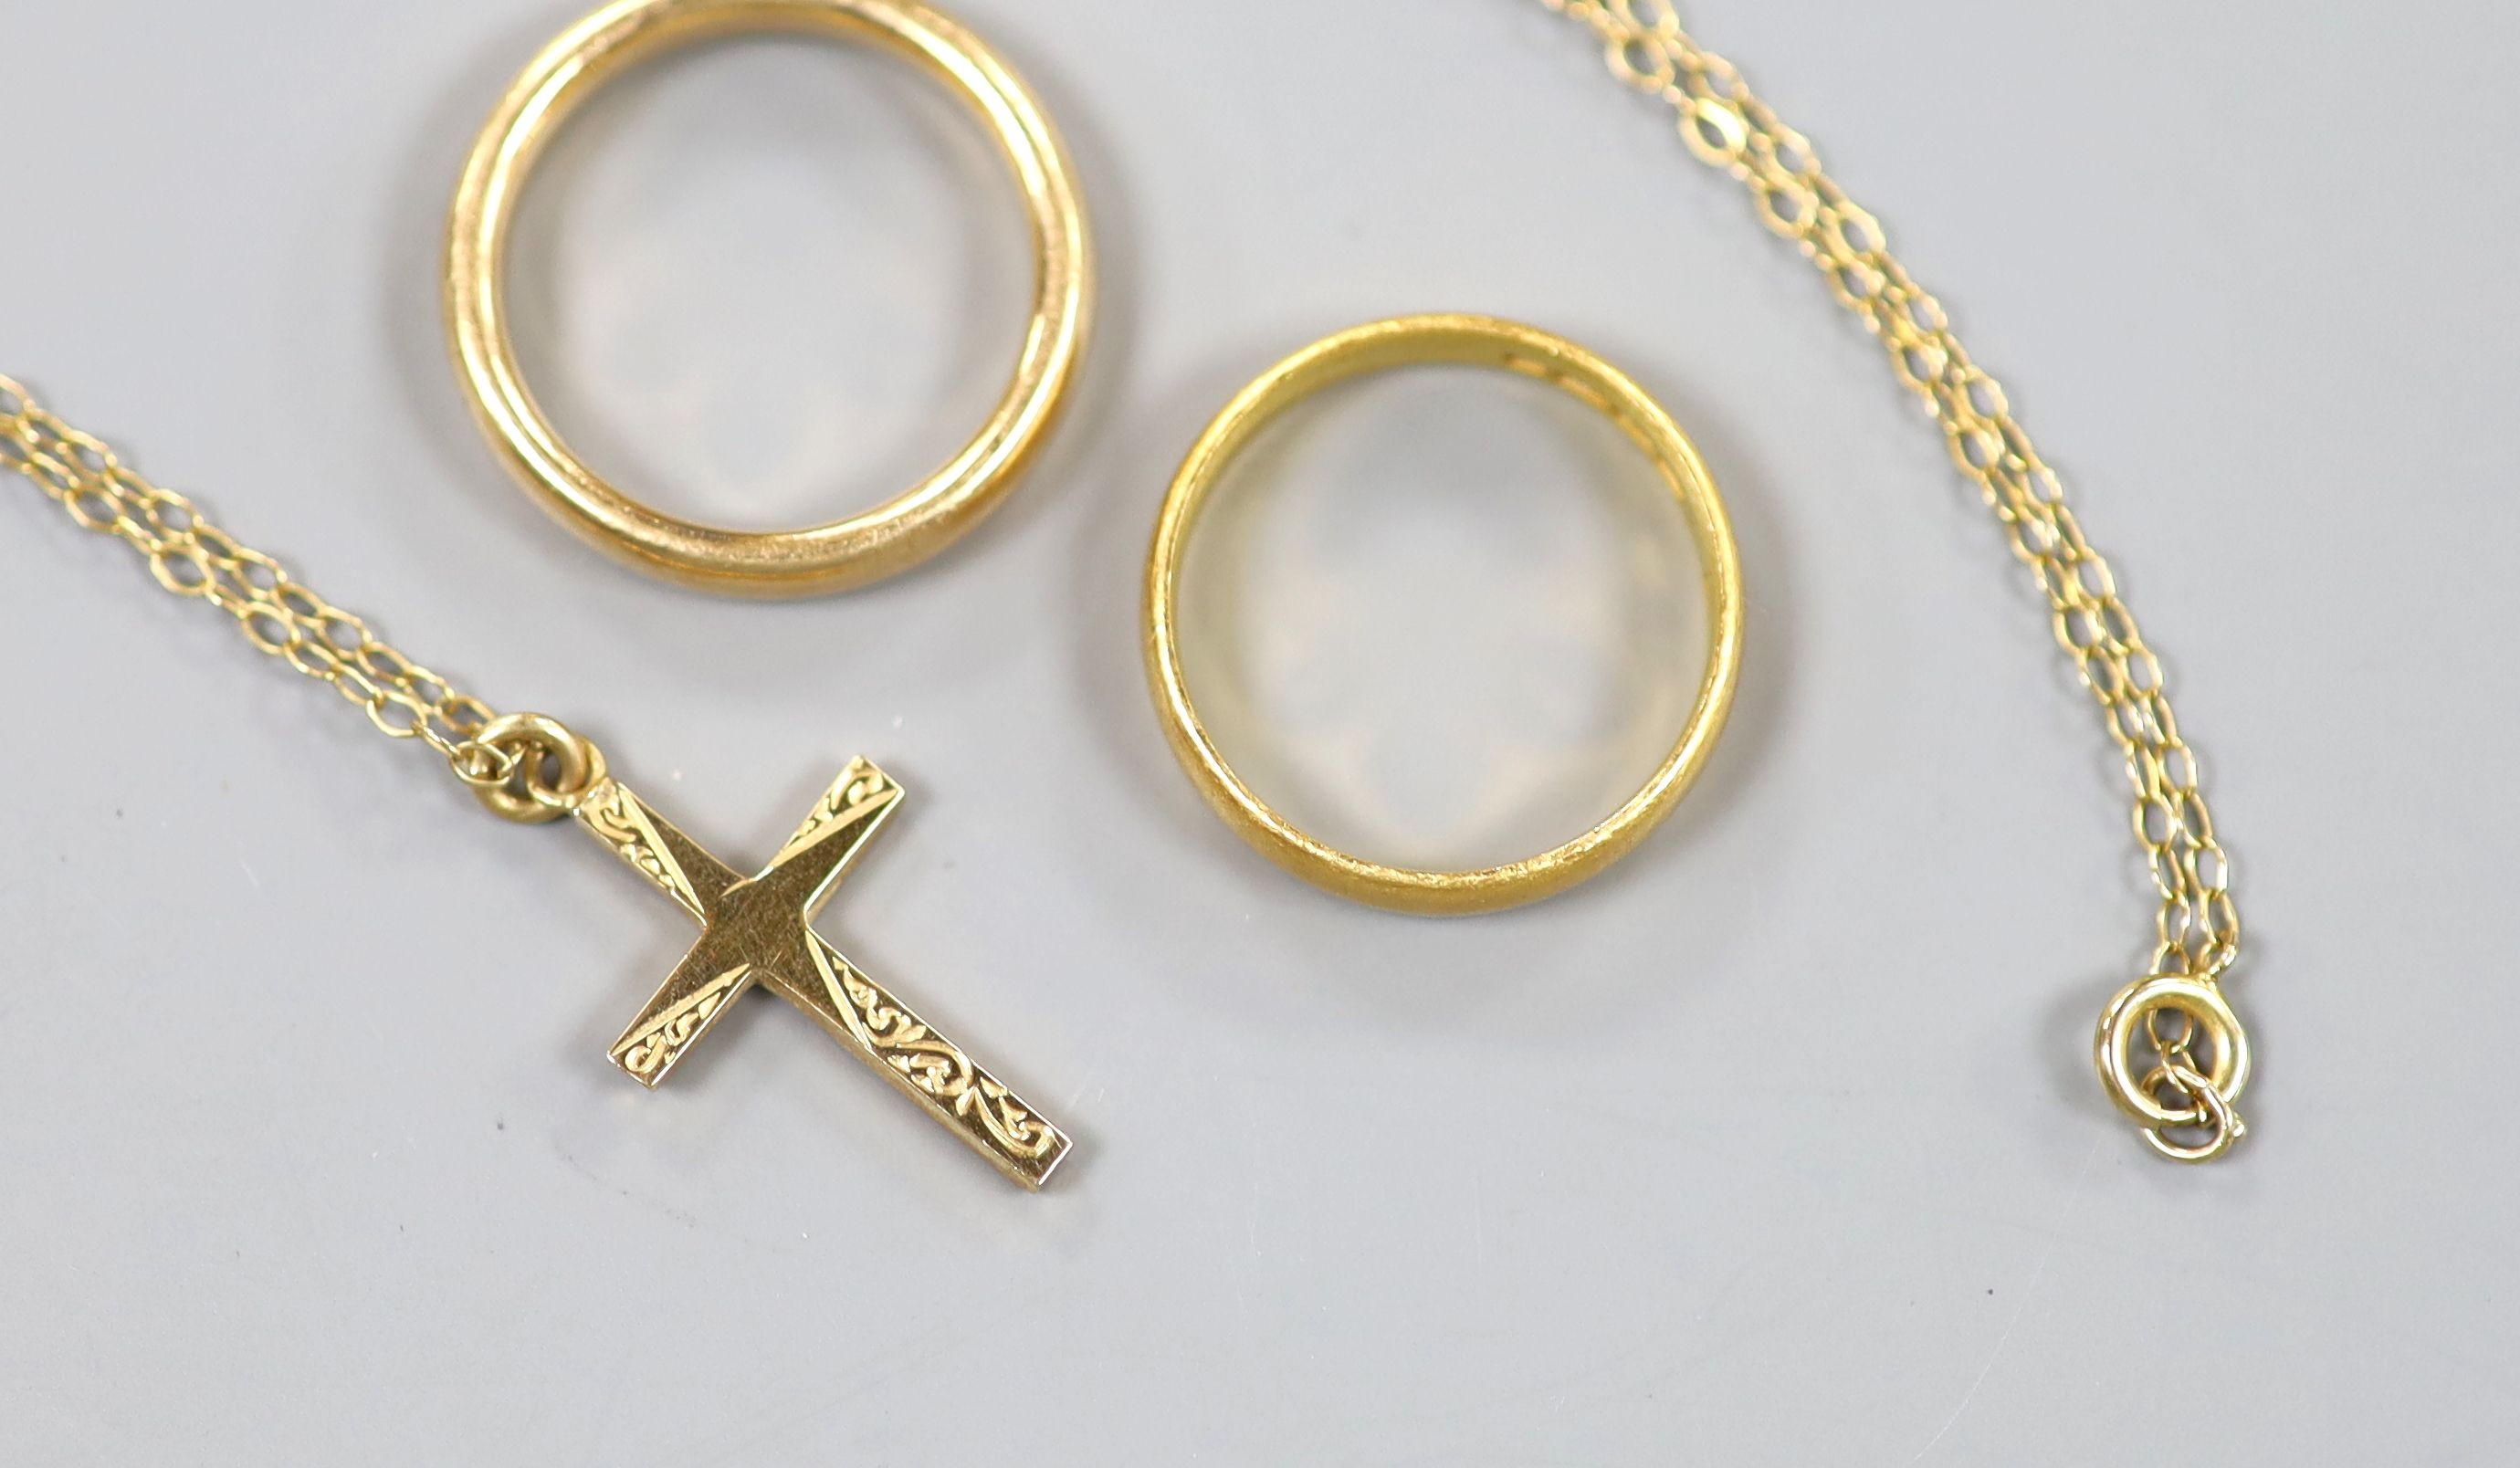 A 22ct god wedding band, 3.7 grams, a yellow meta wedding band, 5 grams and a modern 9ct gold cross pendant on a fine link chain, gross 2.1 grams.